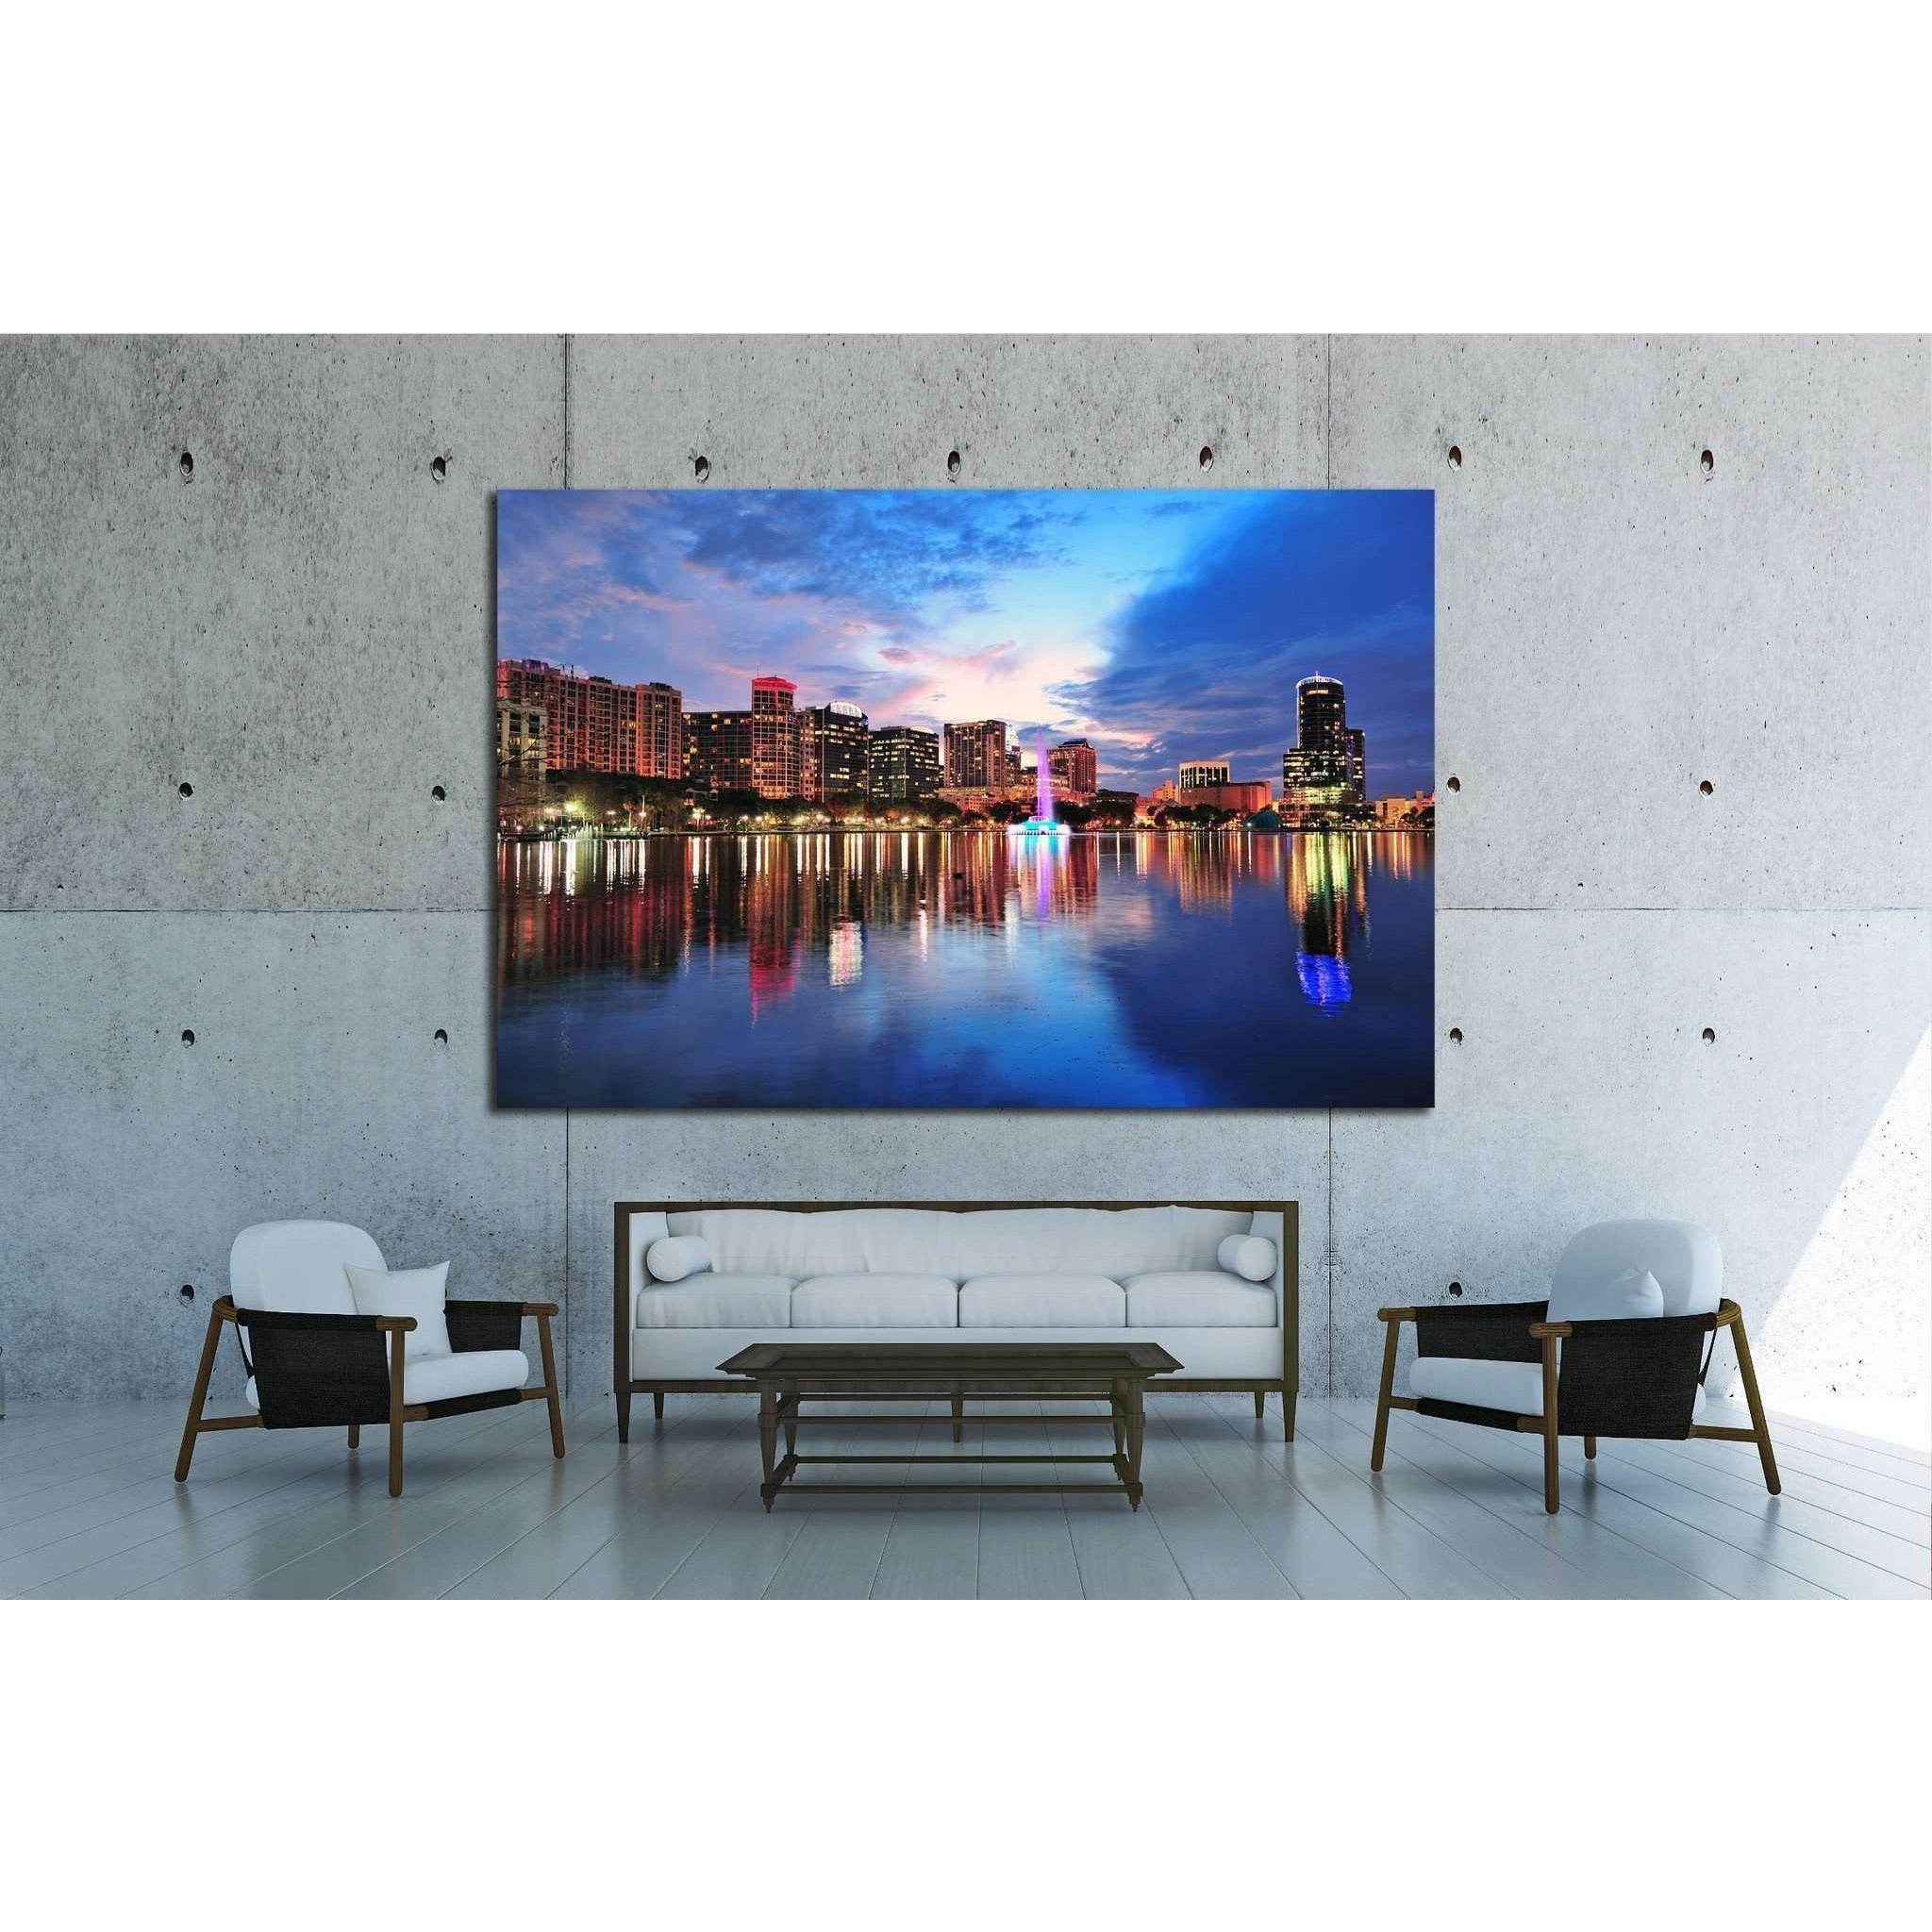 Orlando skyline over Lake Eola at dusk with urban skyscrapers №1671 Ready to Hang Canvas Print